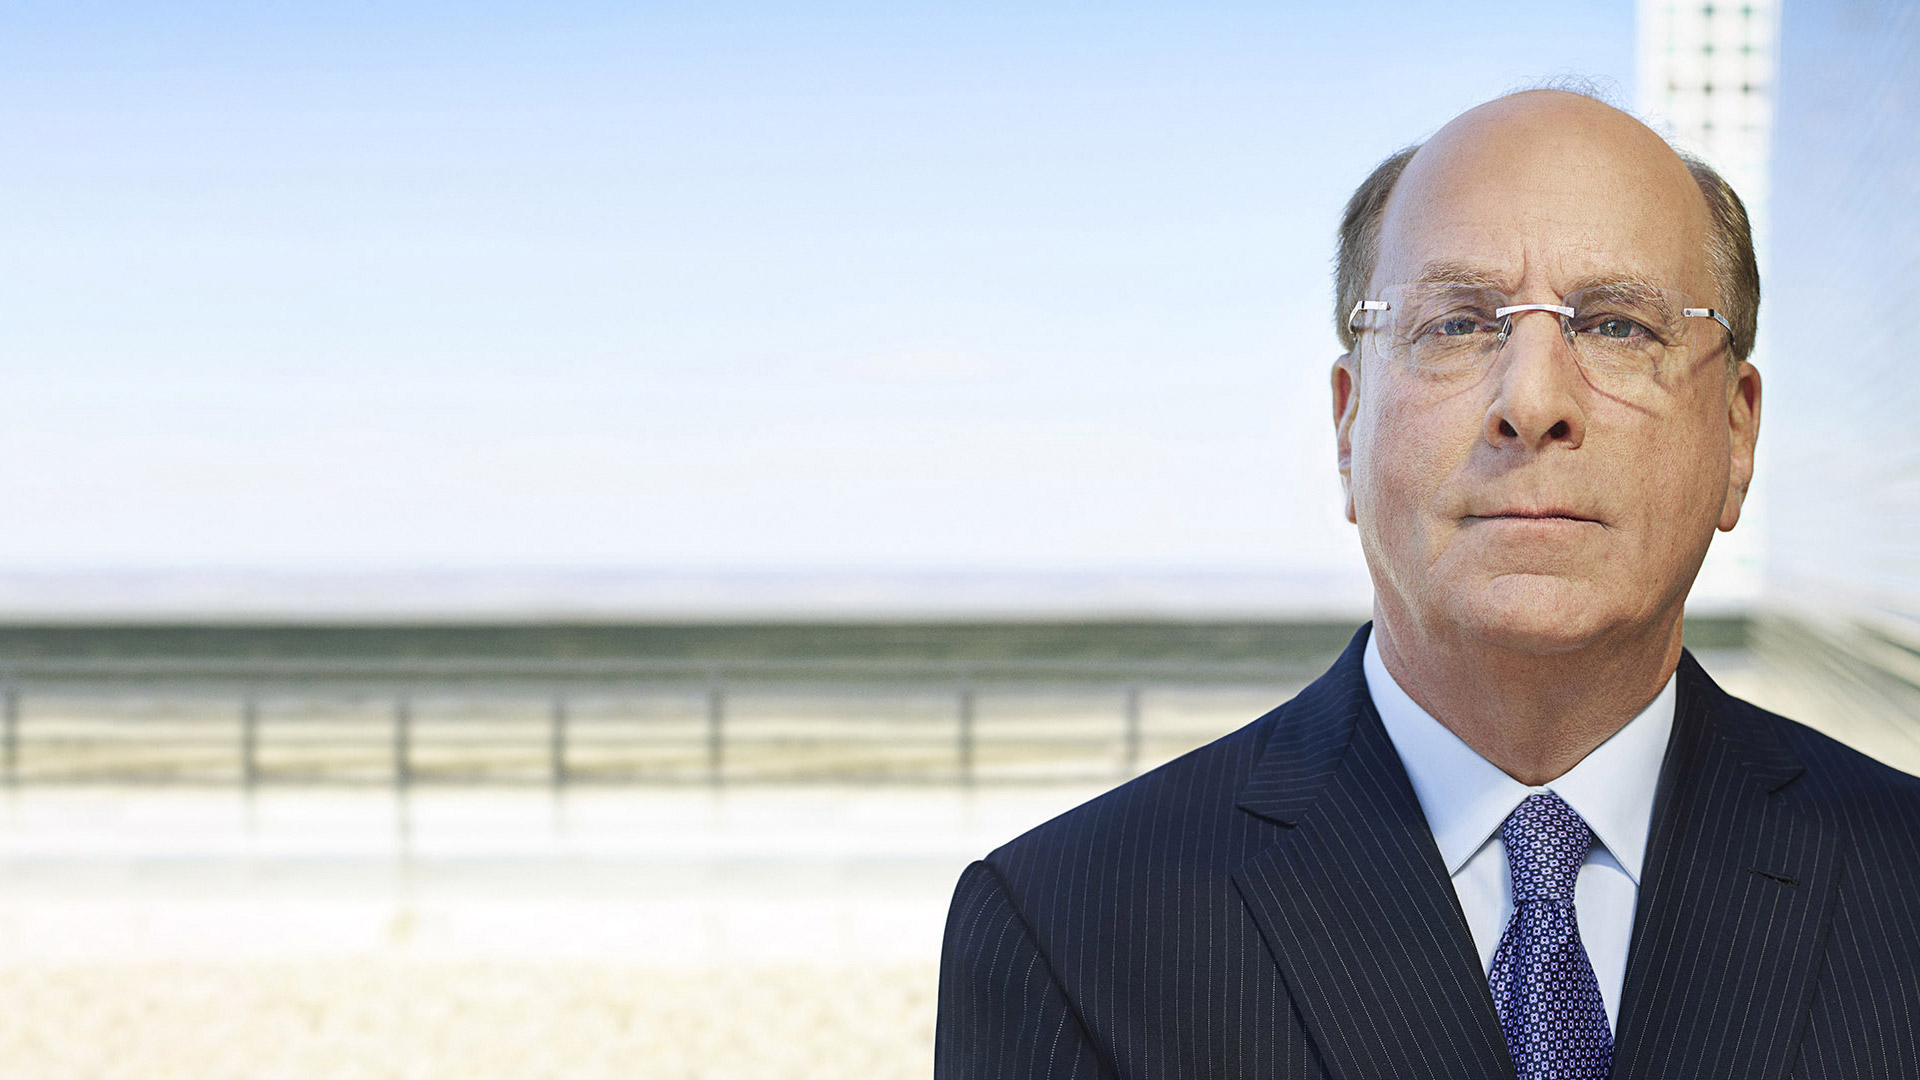 Larry Fink's 2021 letter to CEOs